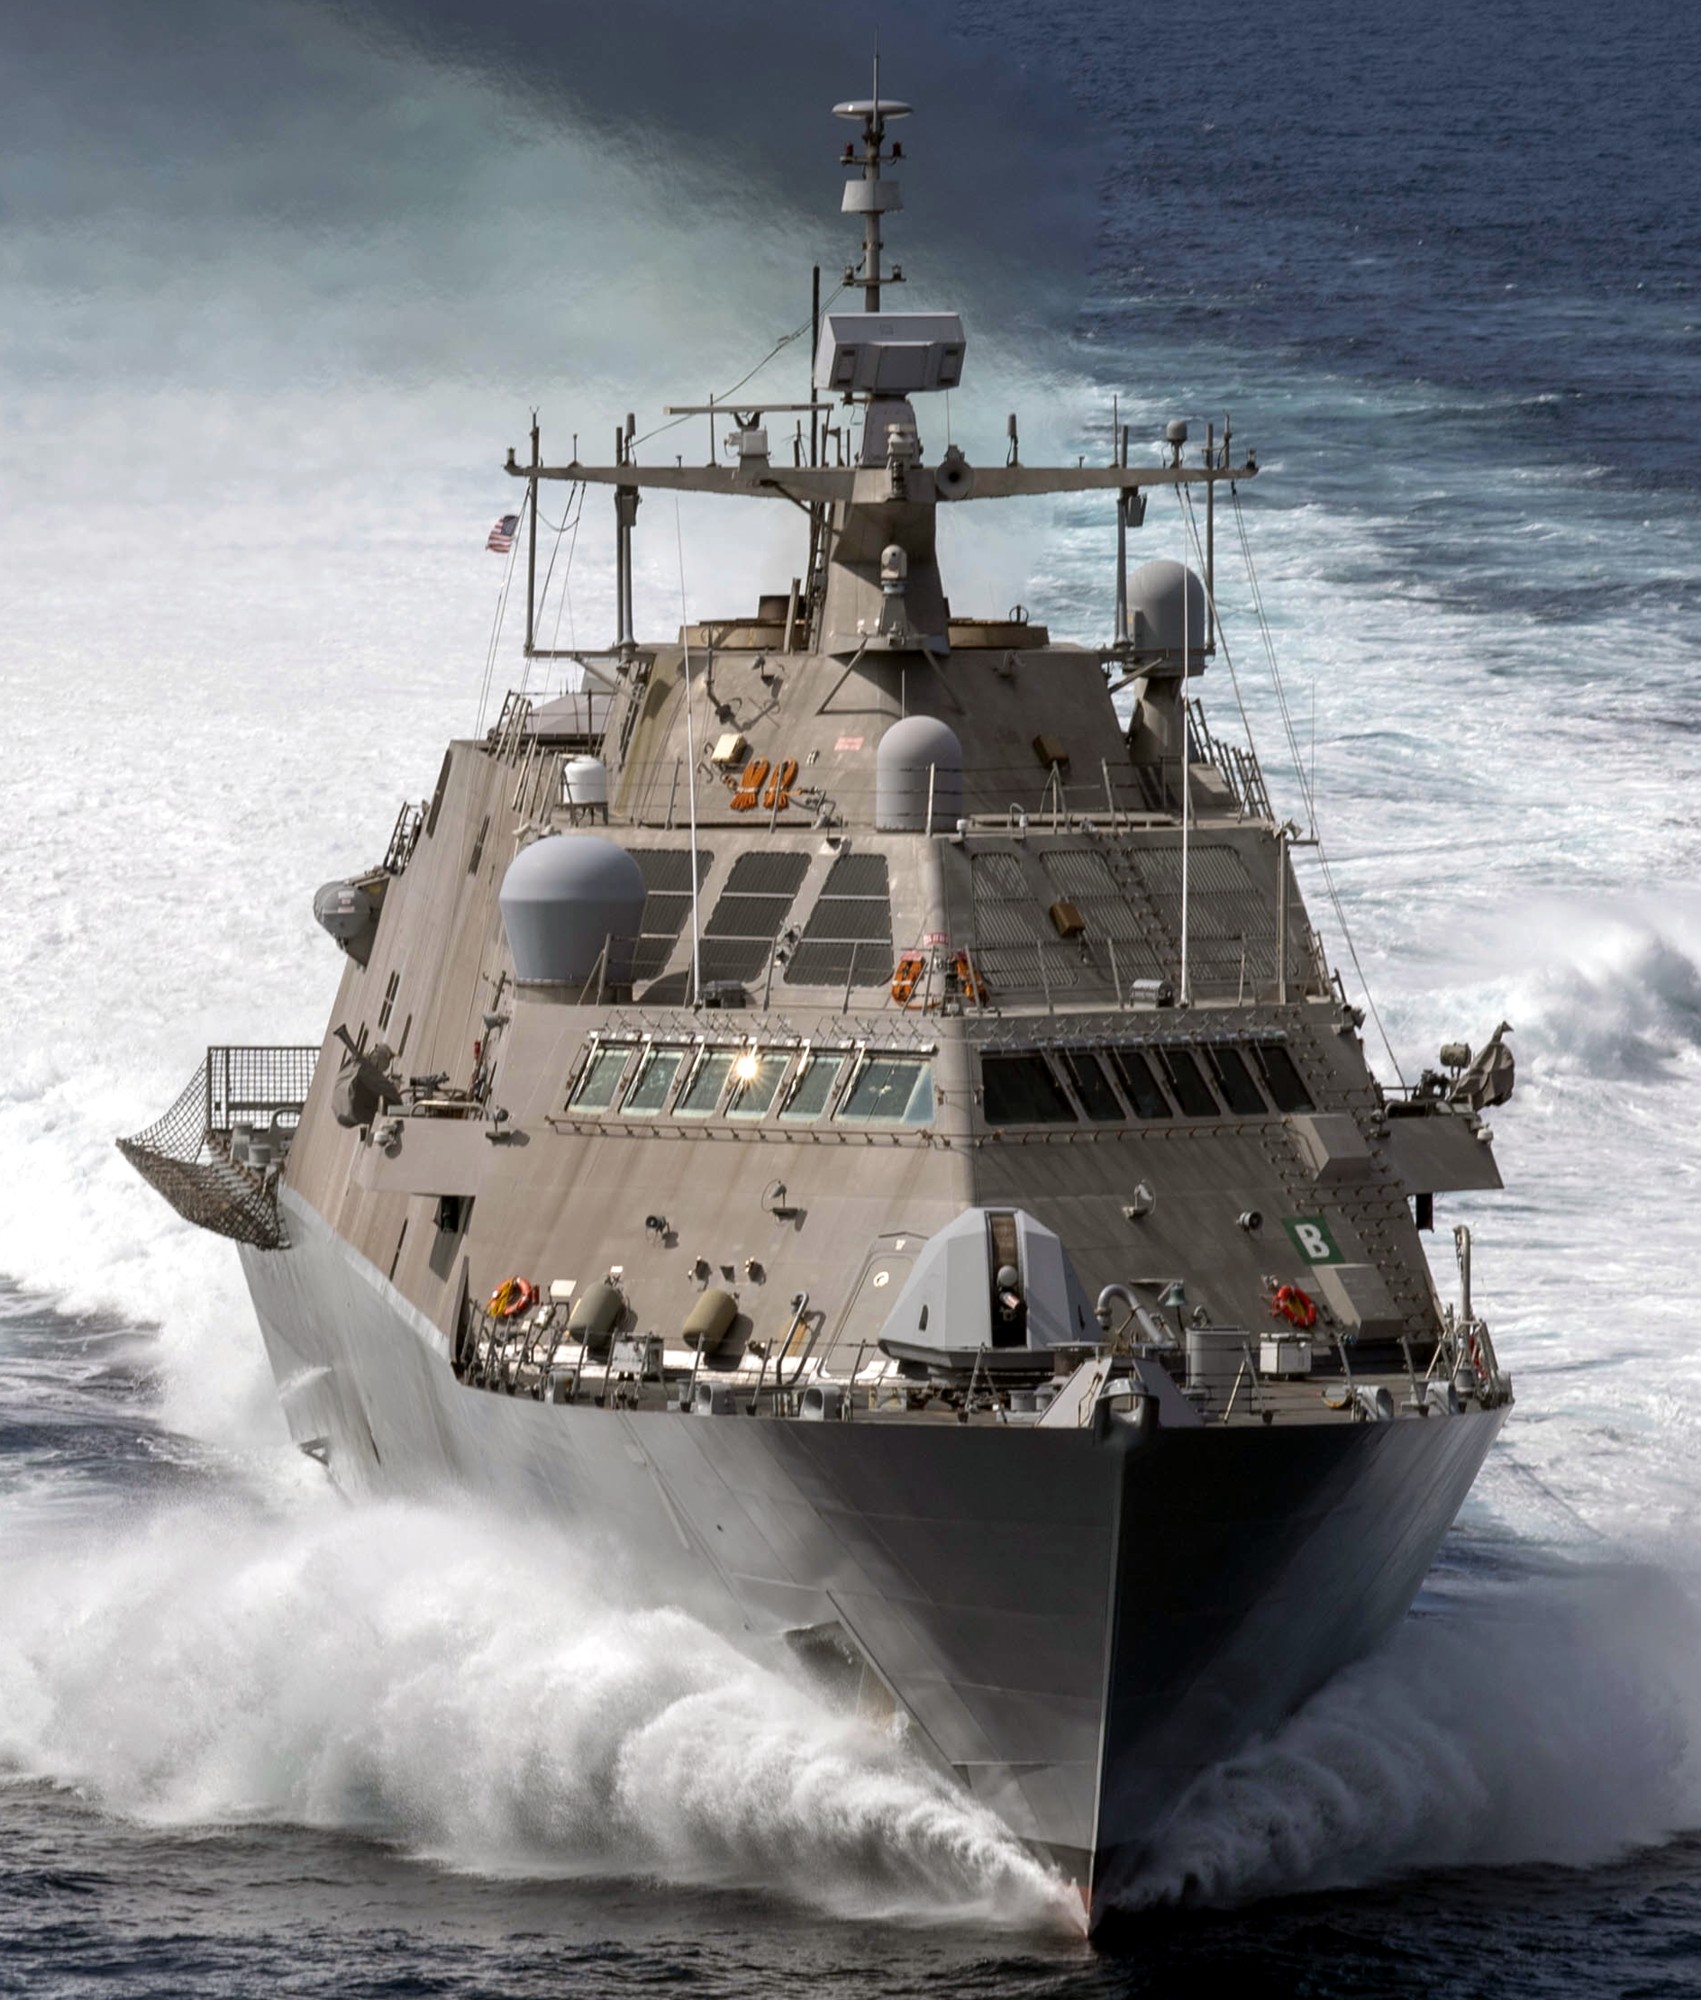 lcs-7 uss detroit freedom class littoral combat ship us navy 34